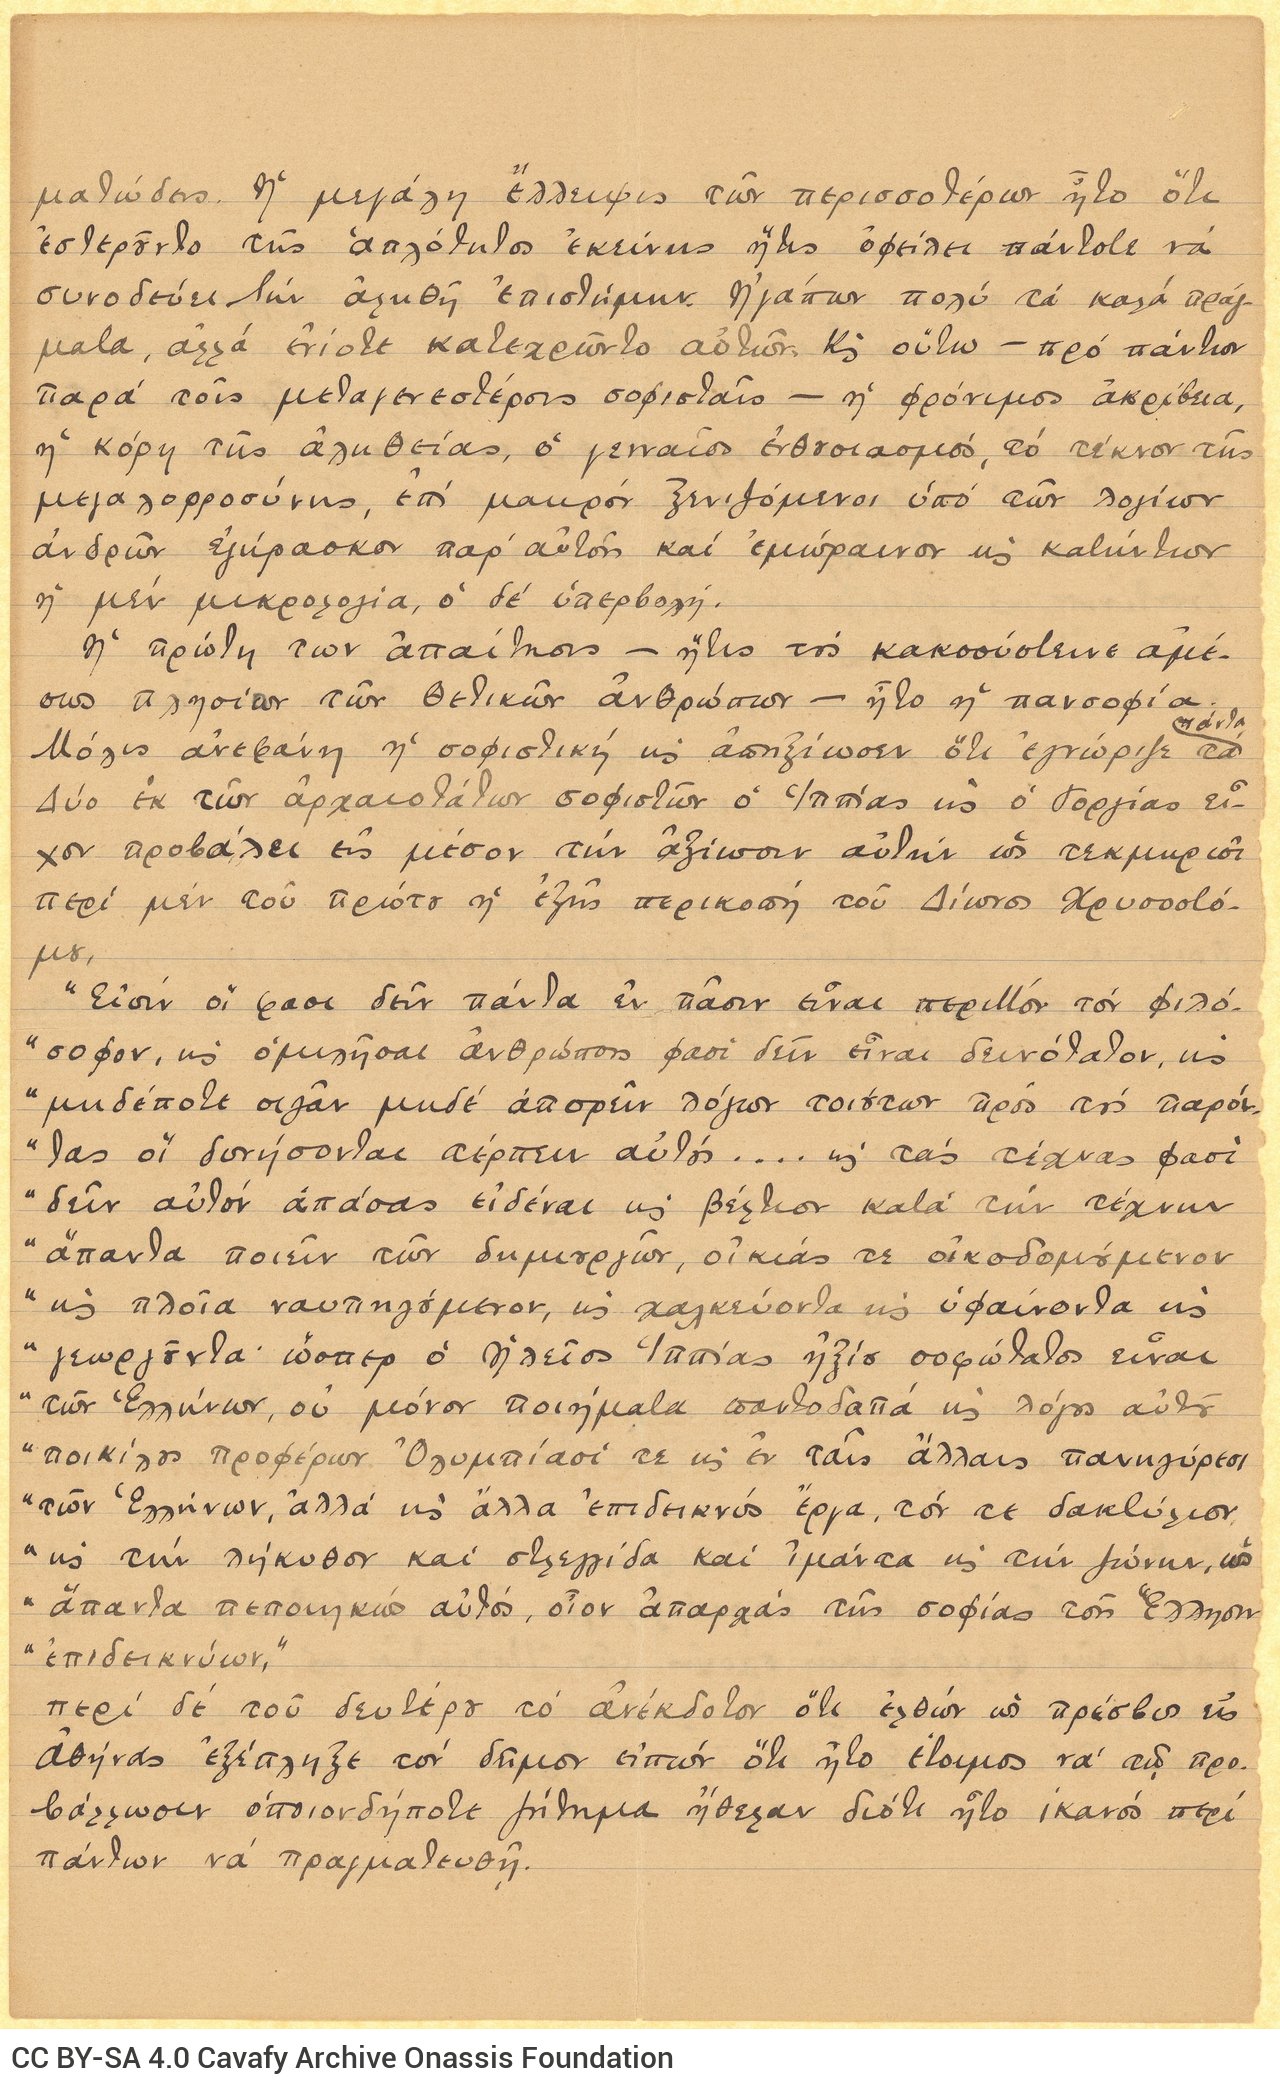 Fragment of a handwritten prose text by Cavafy on the life and work of the sophists, on both sides of six ruled sheets (pa